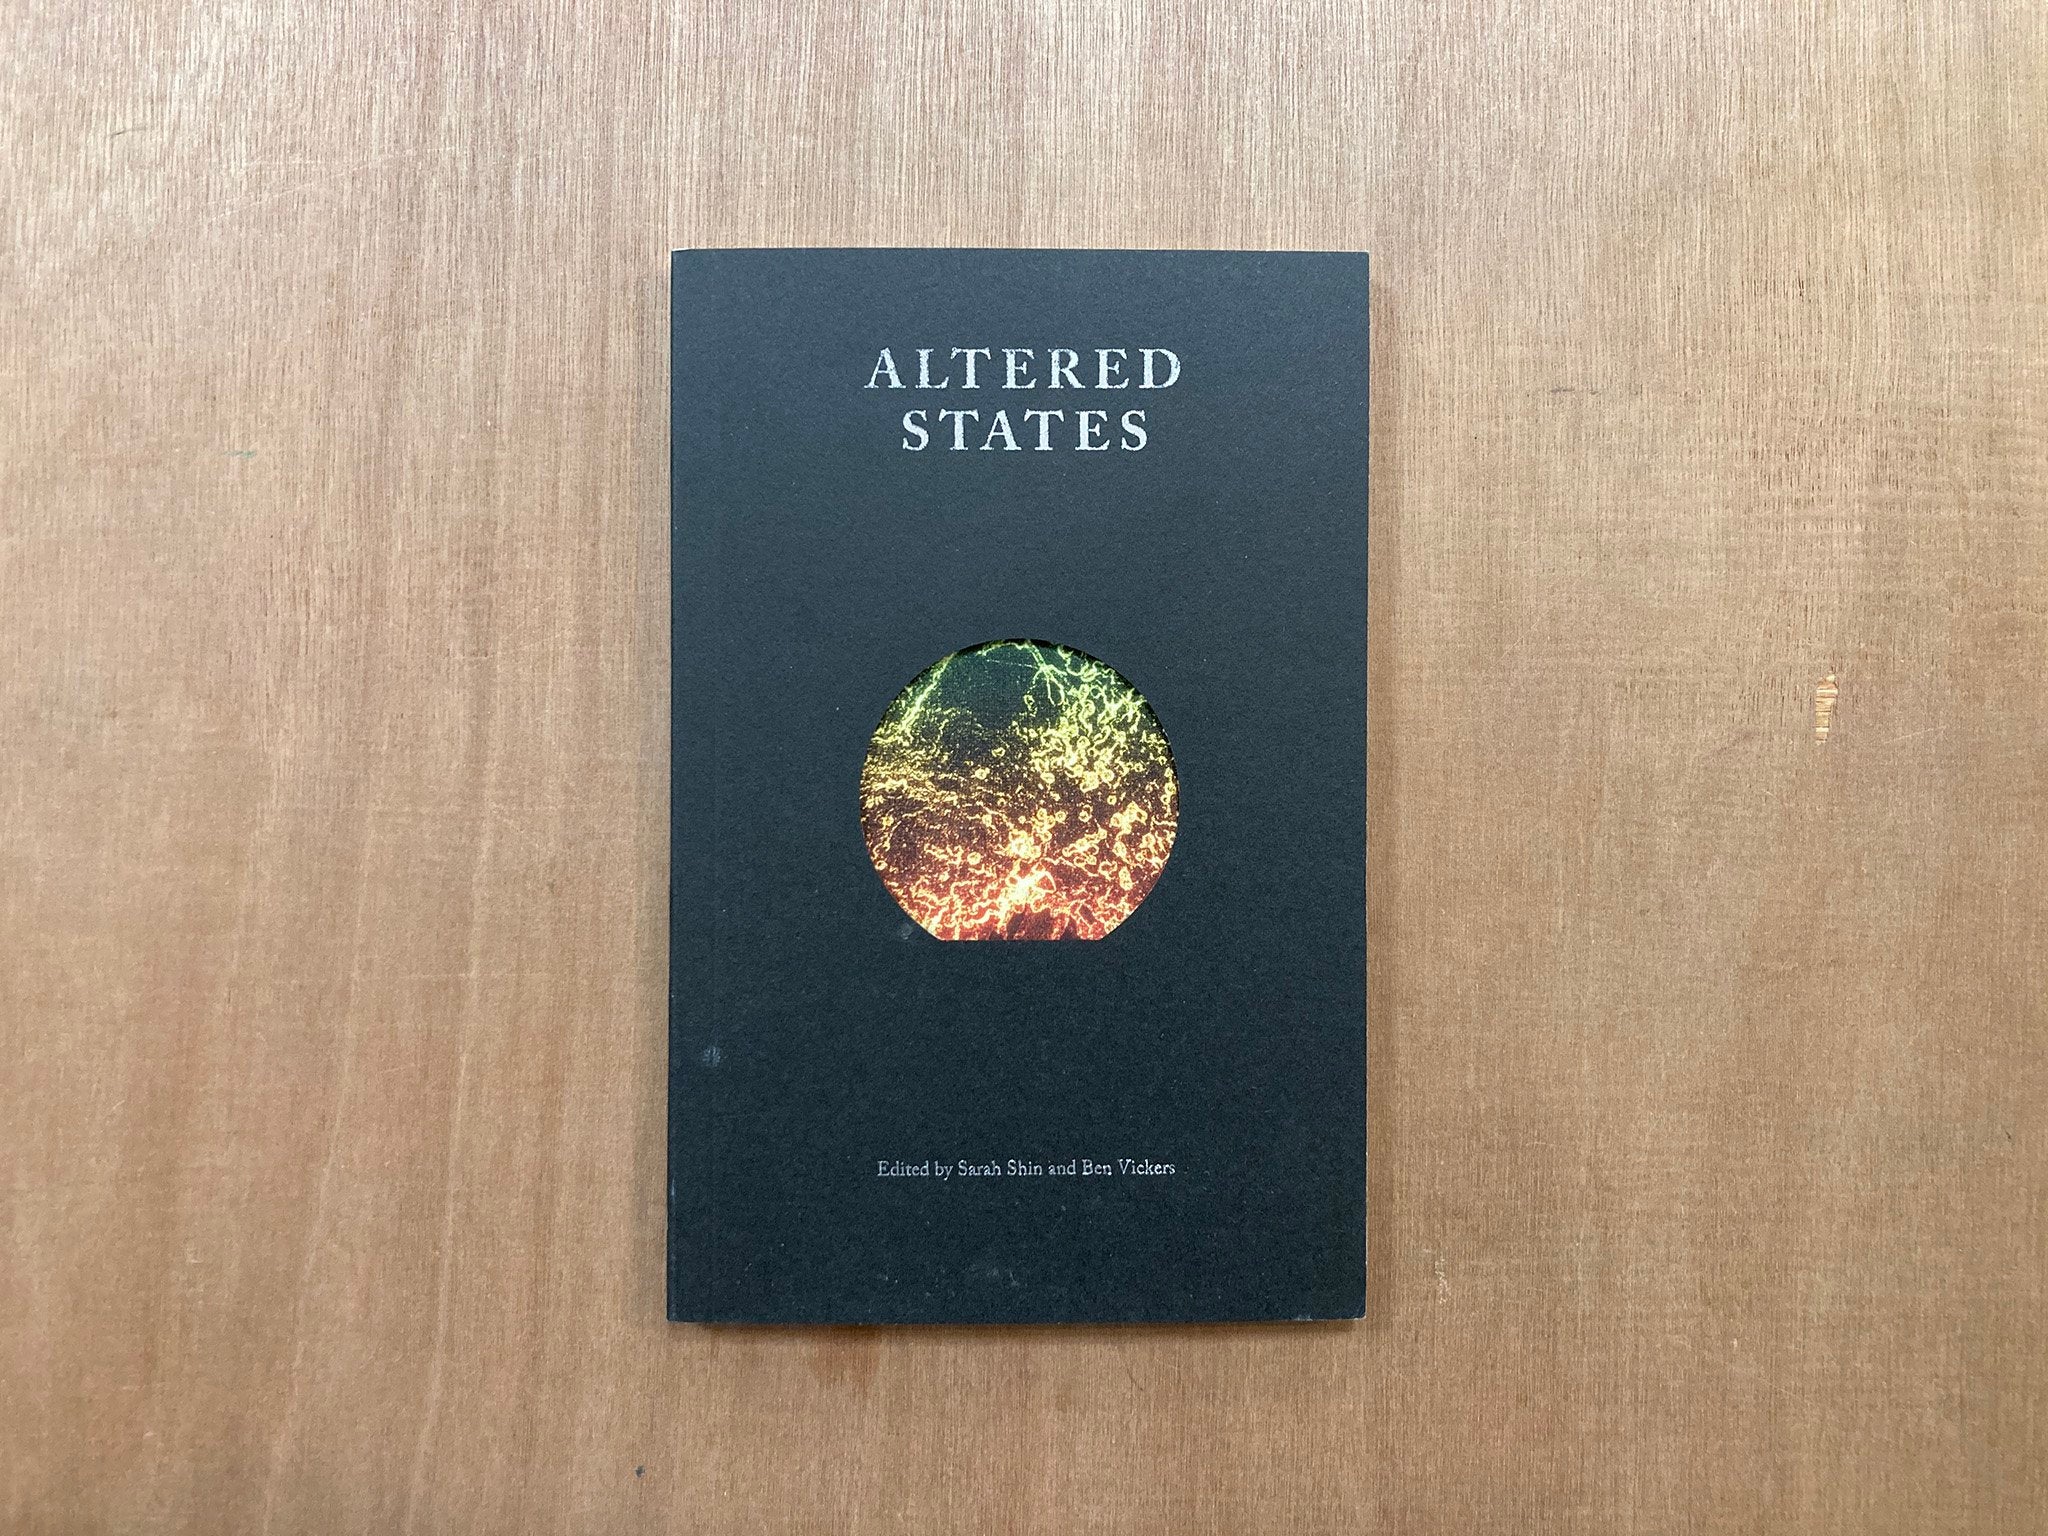 ALTERED STATES edited by Sarah Shin and Ben Vickers